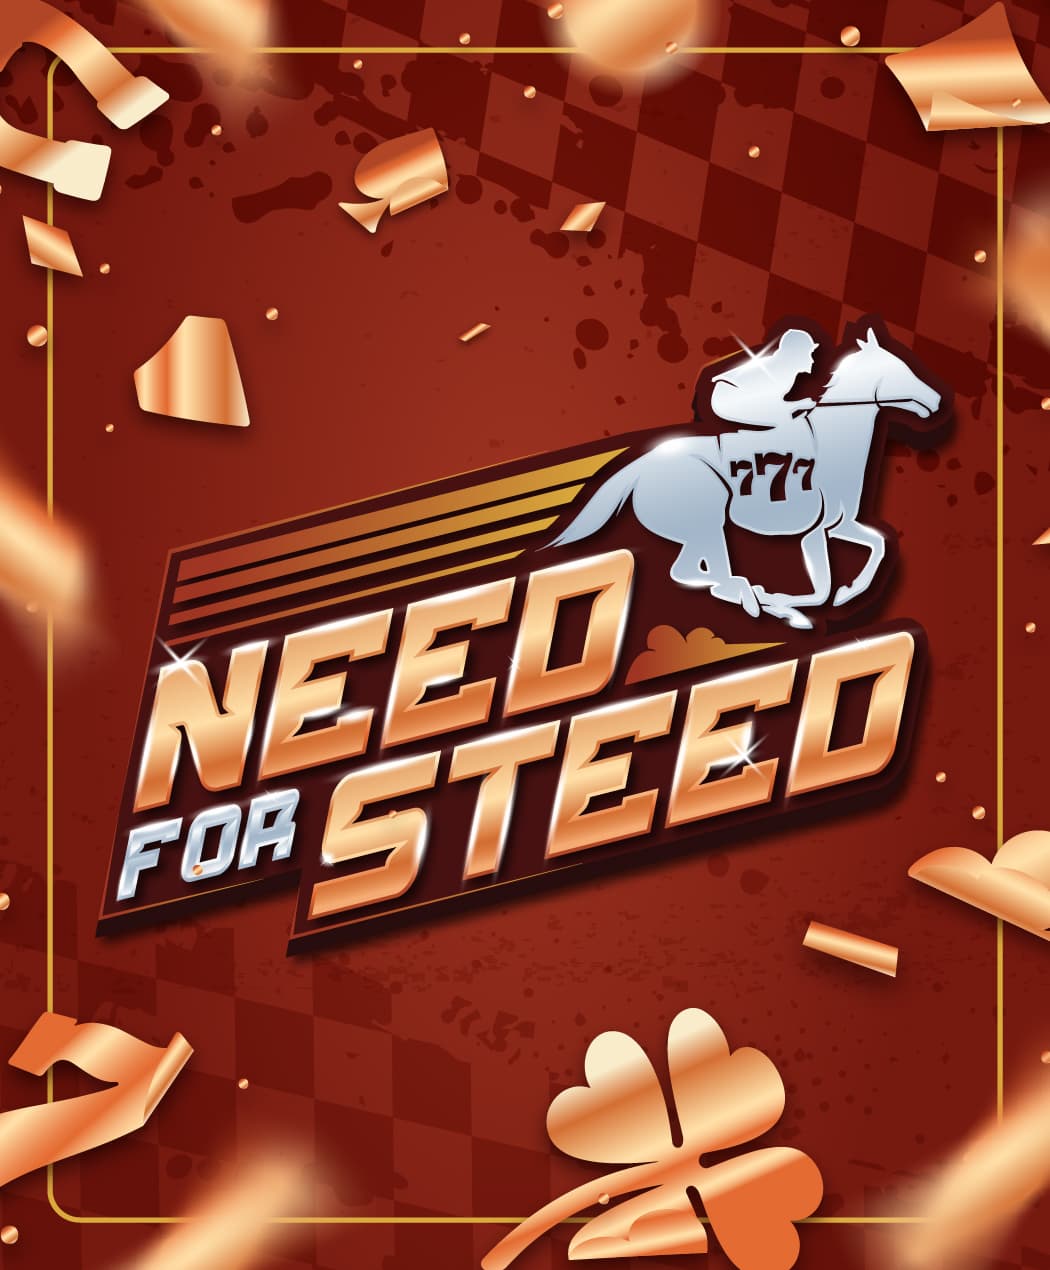 Need for Steed Kiosk